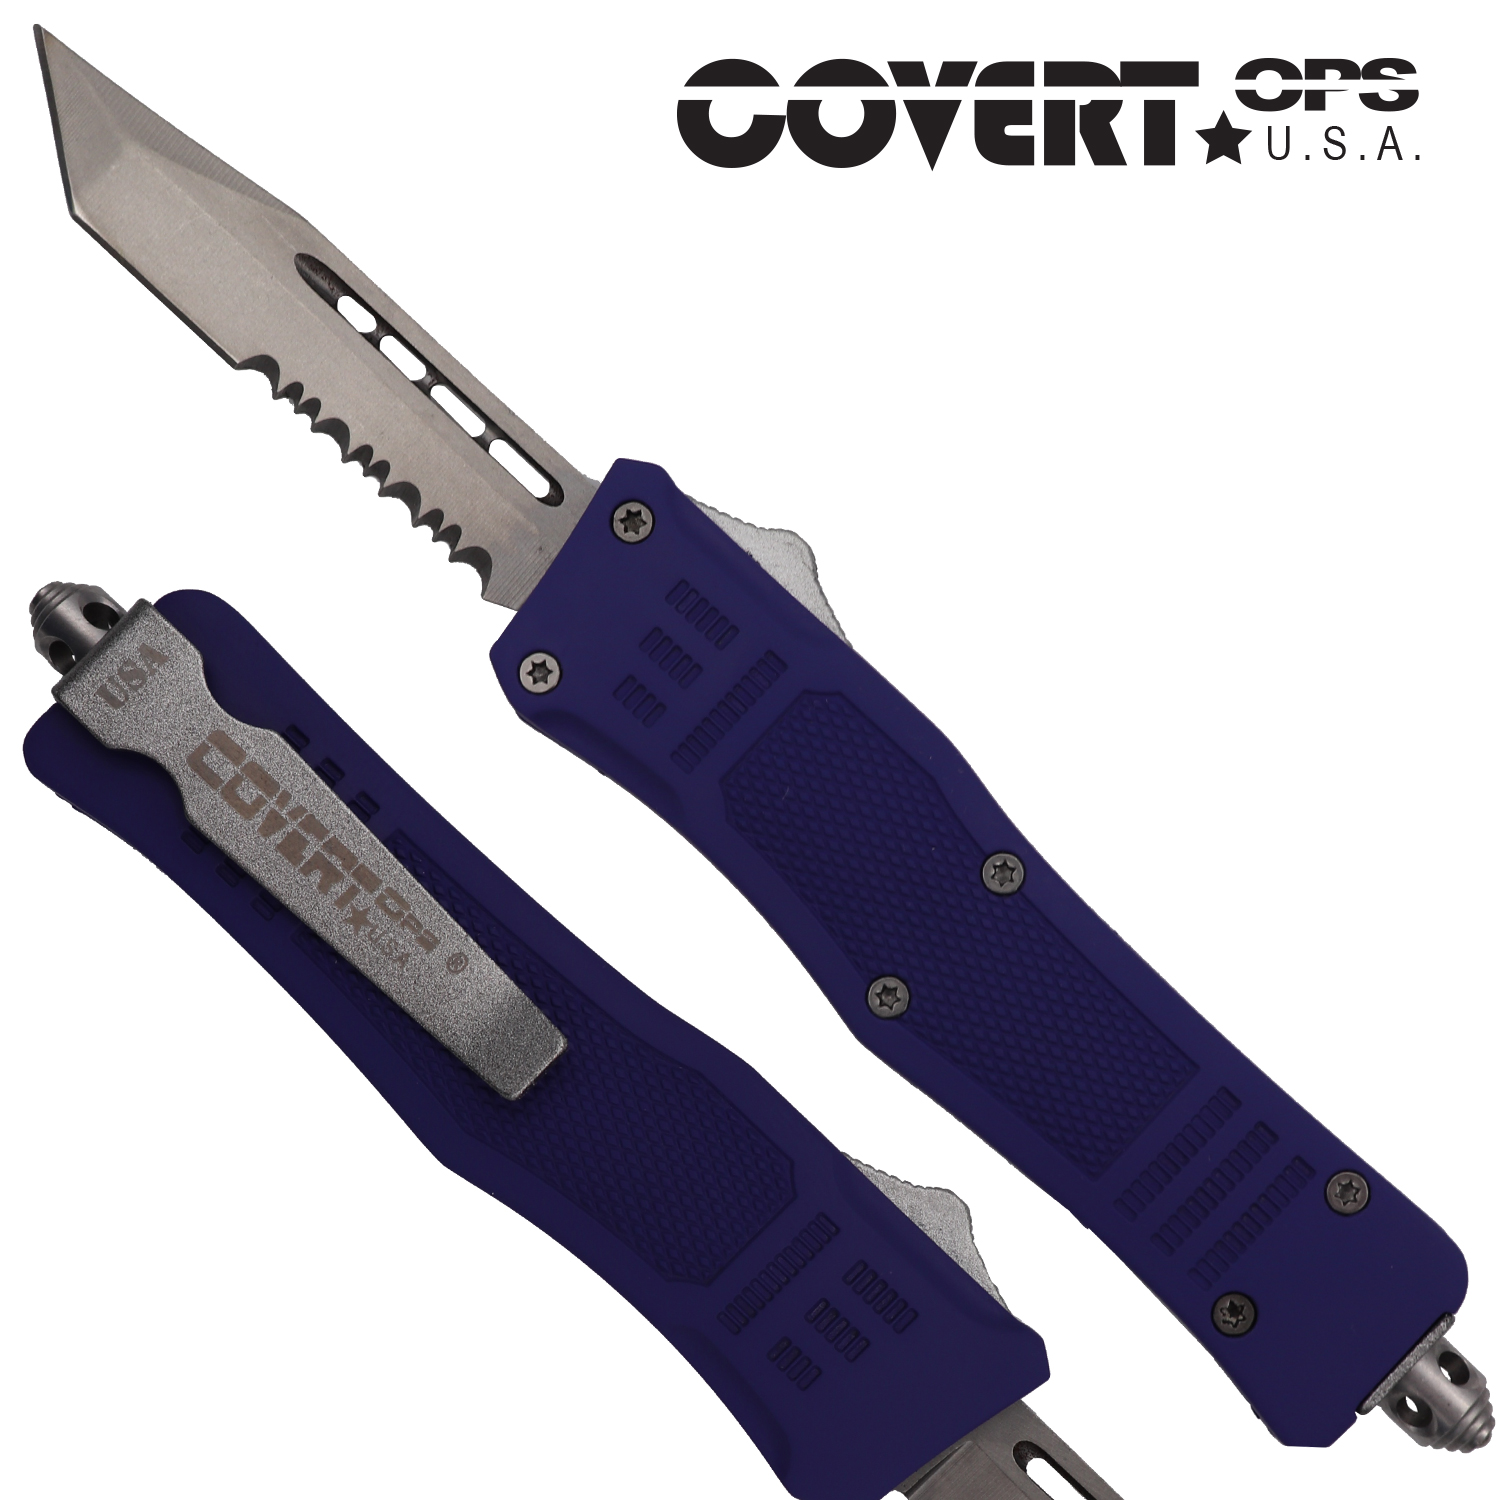 Covert OPS USA OTF Automatic Knife 7 inch overall Purple Handle Silver Tanto D2 Steel Blade